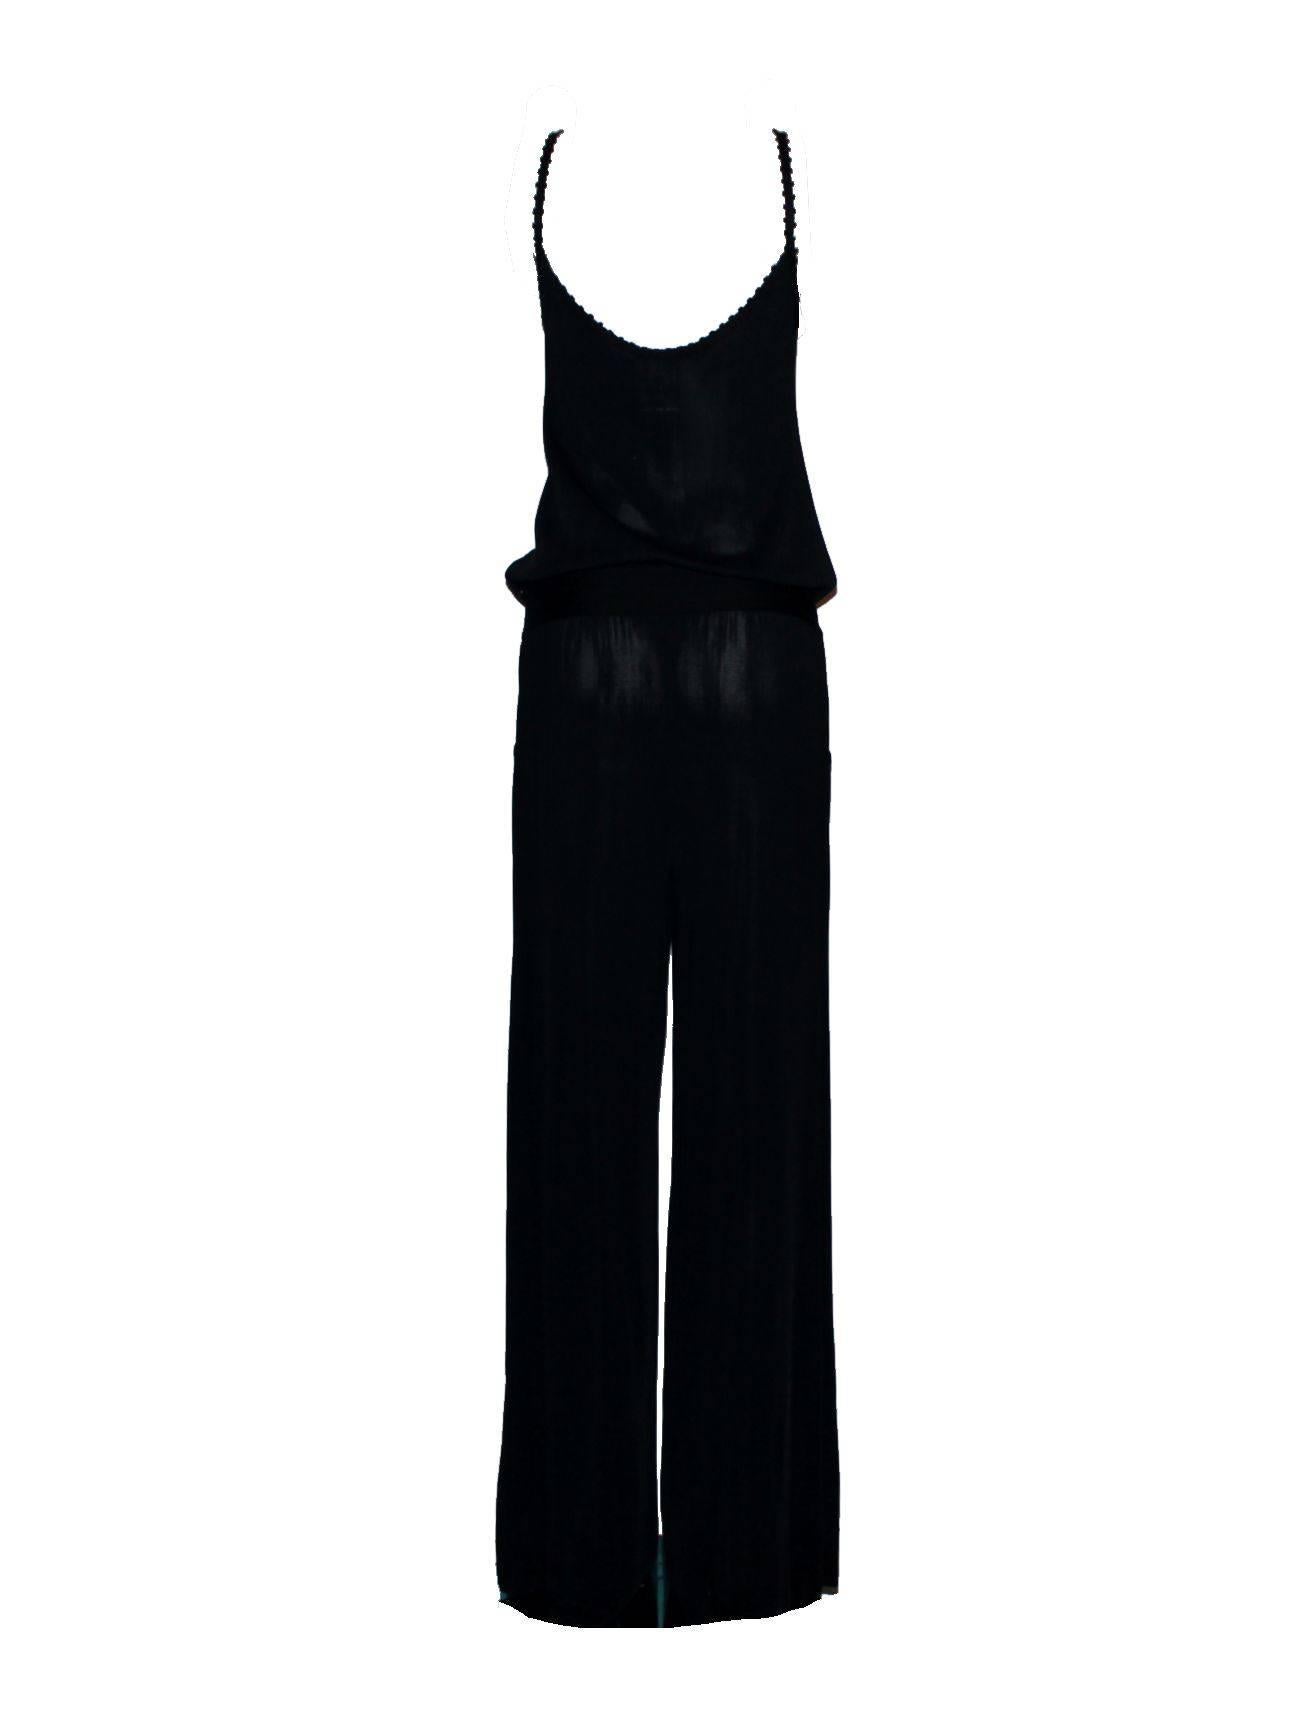 Stunning Chanel Jumpsuit 
A Chanel signature piece that lasts for many years
So versatile - perfect to wear at home, during the day with a jacket or for an evening out
Softest black fine-knitted fabric, comfortable to wear and stylish
Spaghetti